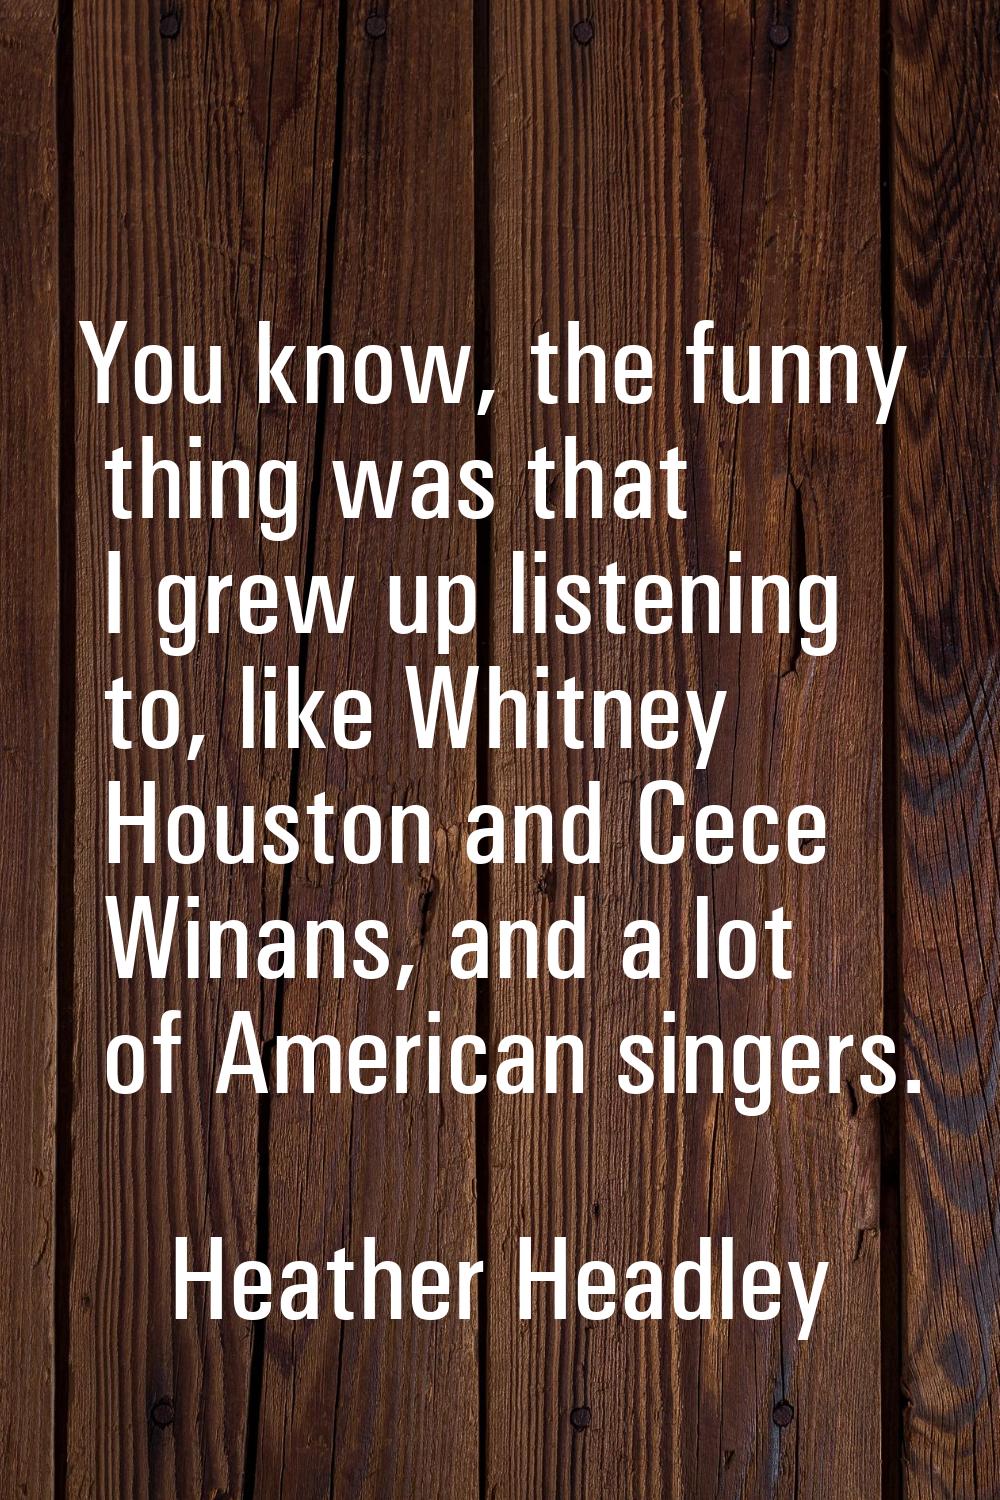 You know, the funny thing was that I grew up listening to, like Whitney Houston and Cece Winans, an